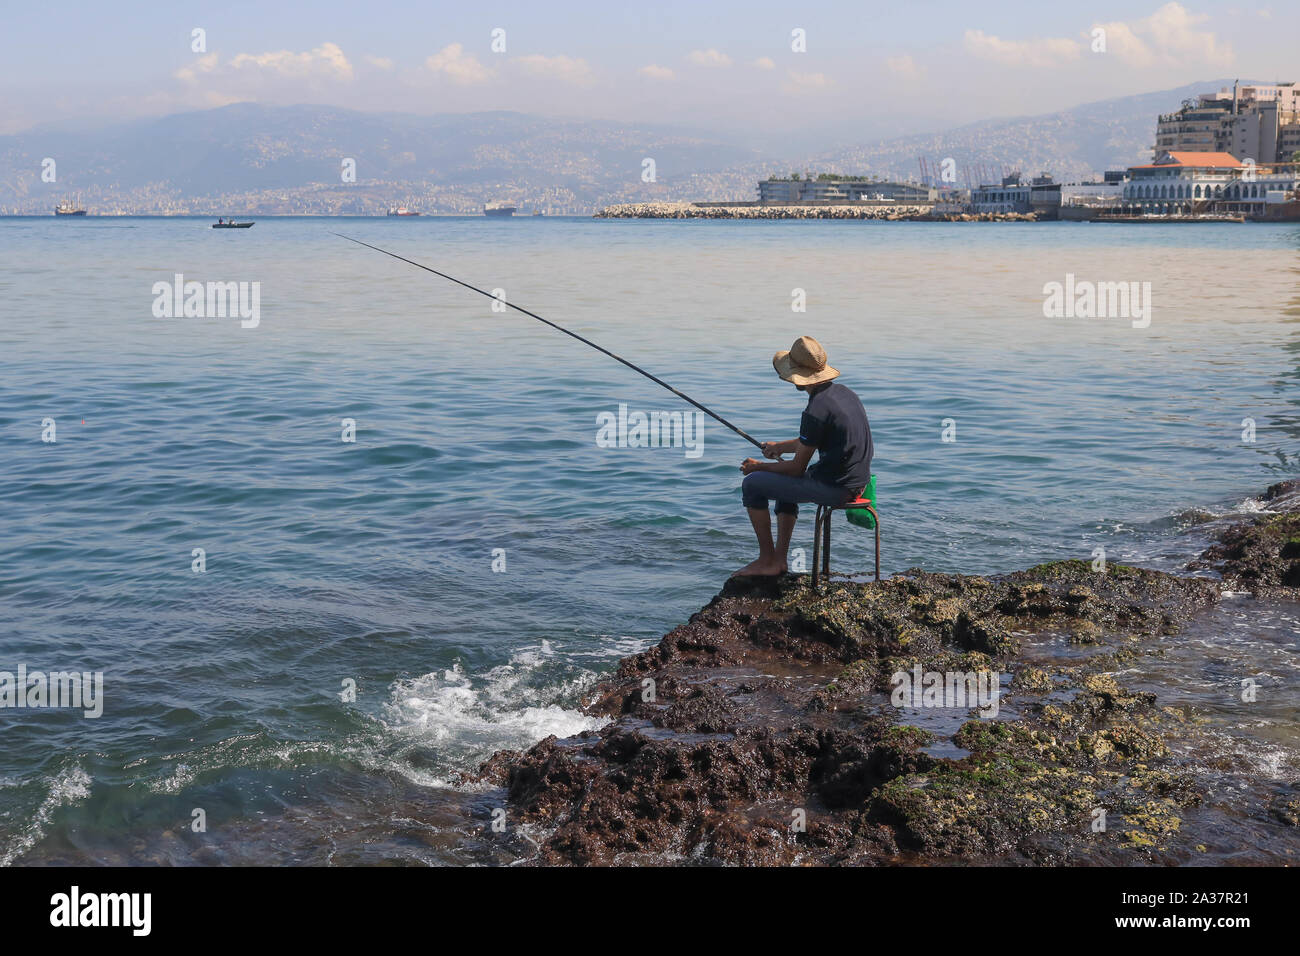 October 6, 2019, Beirut, Lebanon: A man fishing at the seafront during the hot and humid day in Beirut. (Credit Image: © Amer Ghazzal/SOPA Images via ZUMA Wire) Stock Photo